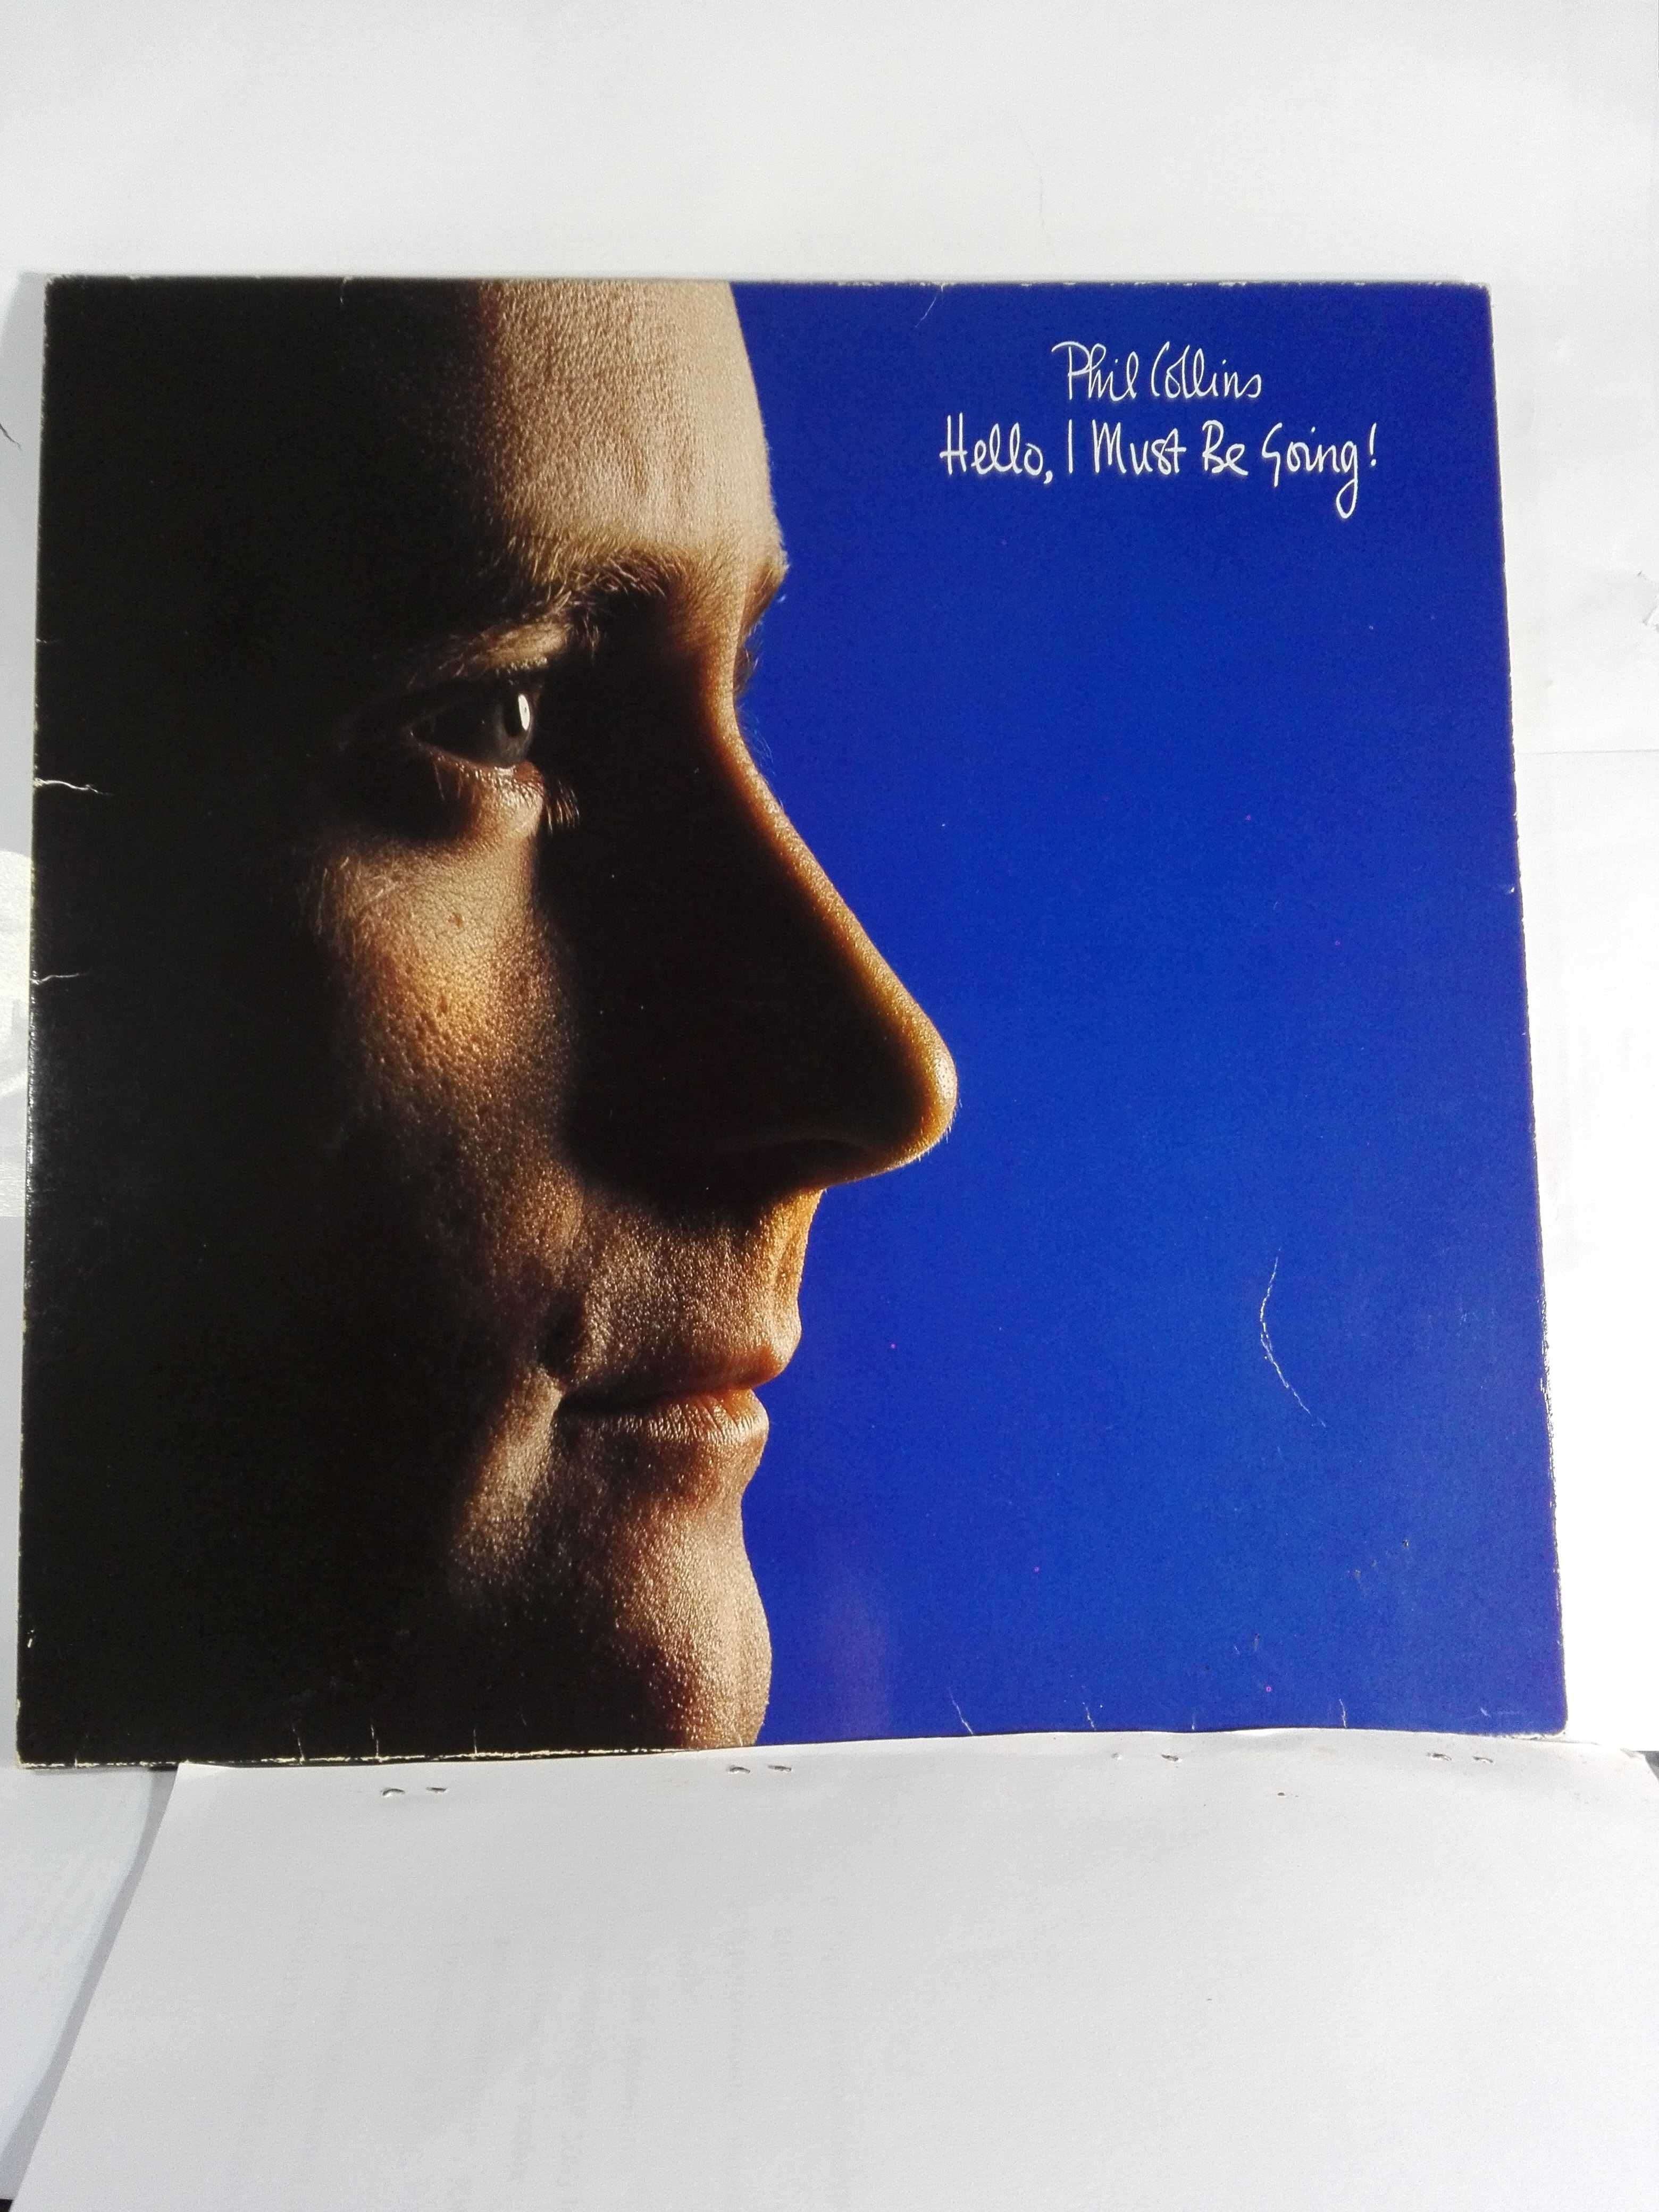 Phil Collins  "Hello, I Must Be Going" LP 1982,WEA 99263